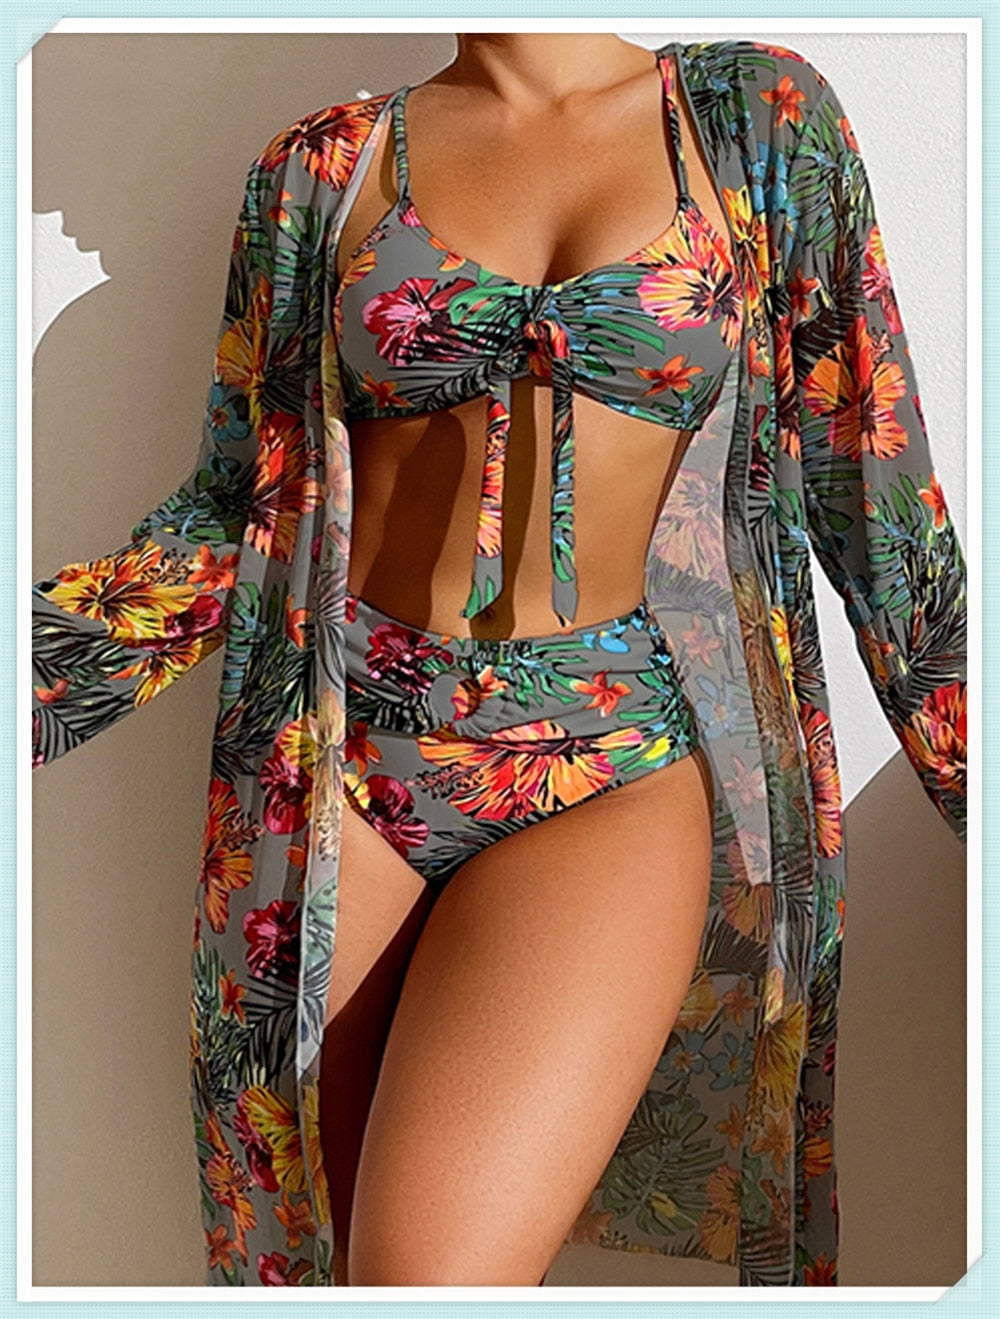 Floral Print Modest Knot Front Bikini including Cover Up Shirt